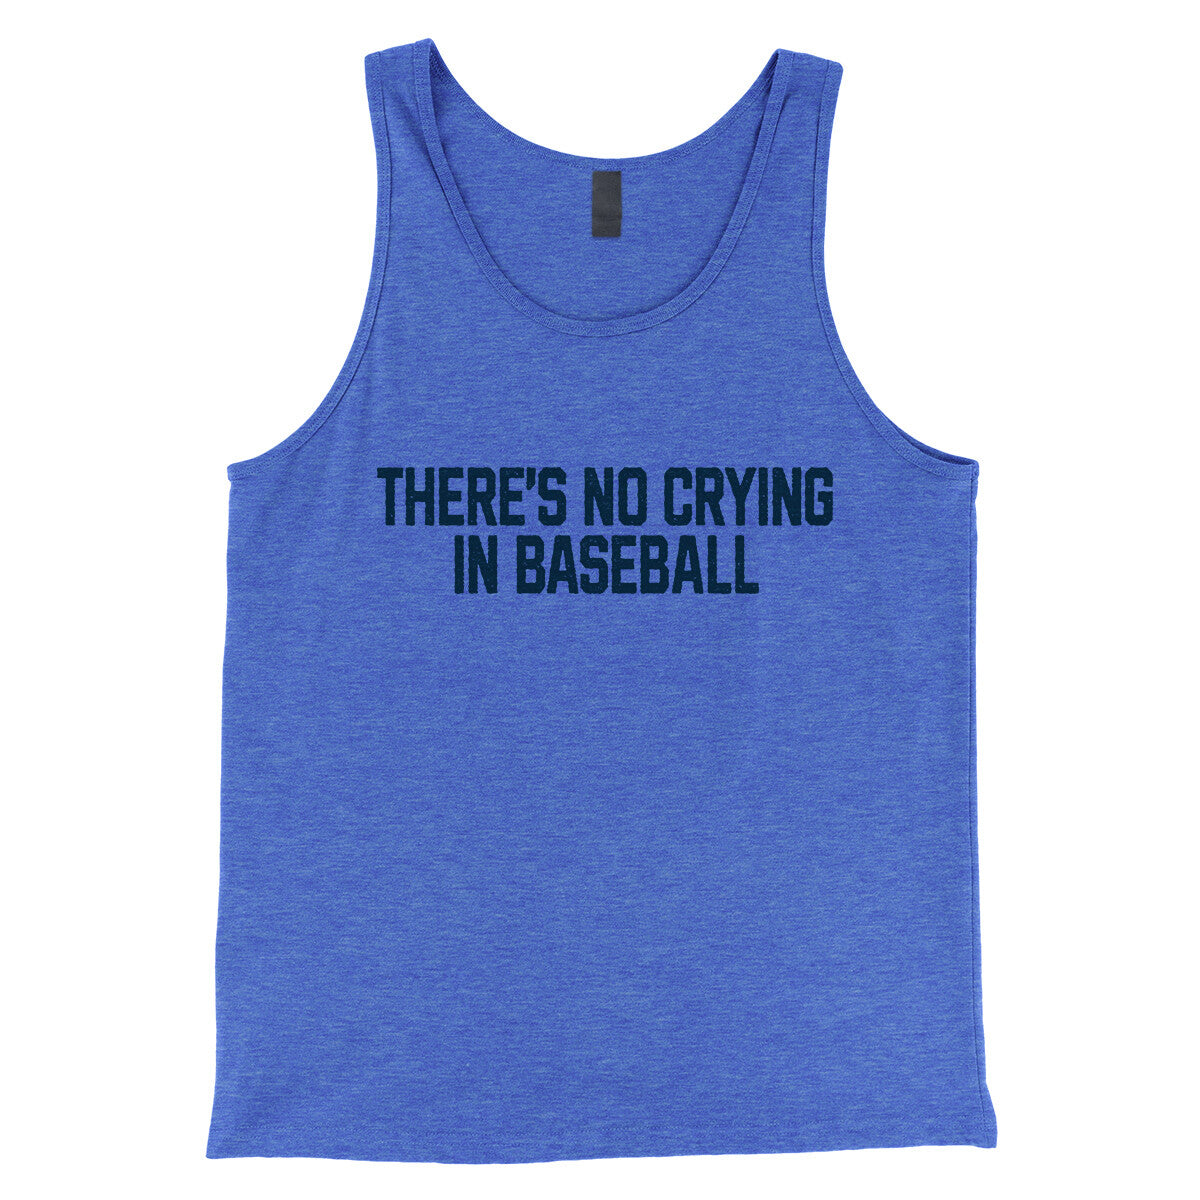 There's No Crying in Baseball in True Royal TriBlend Color